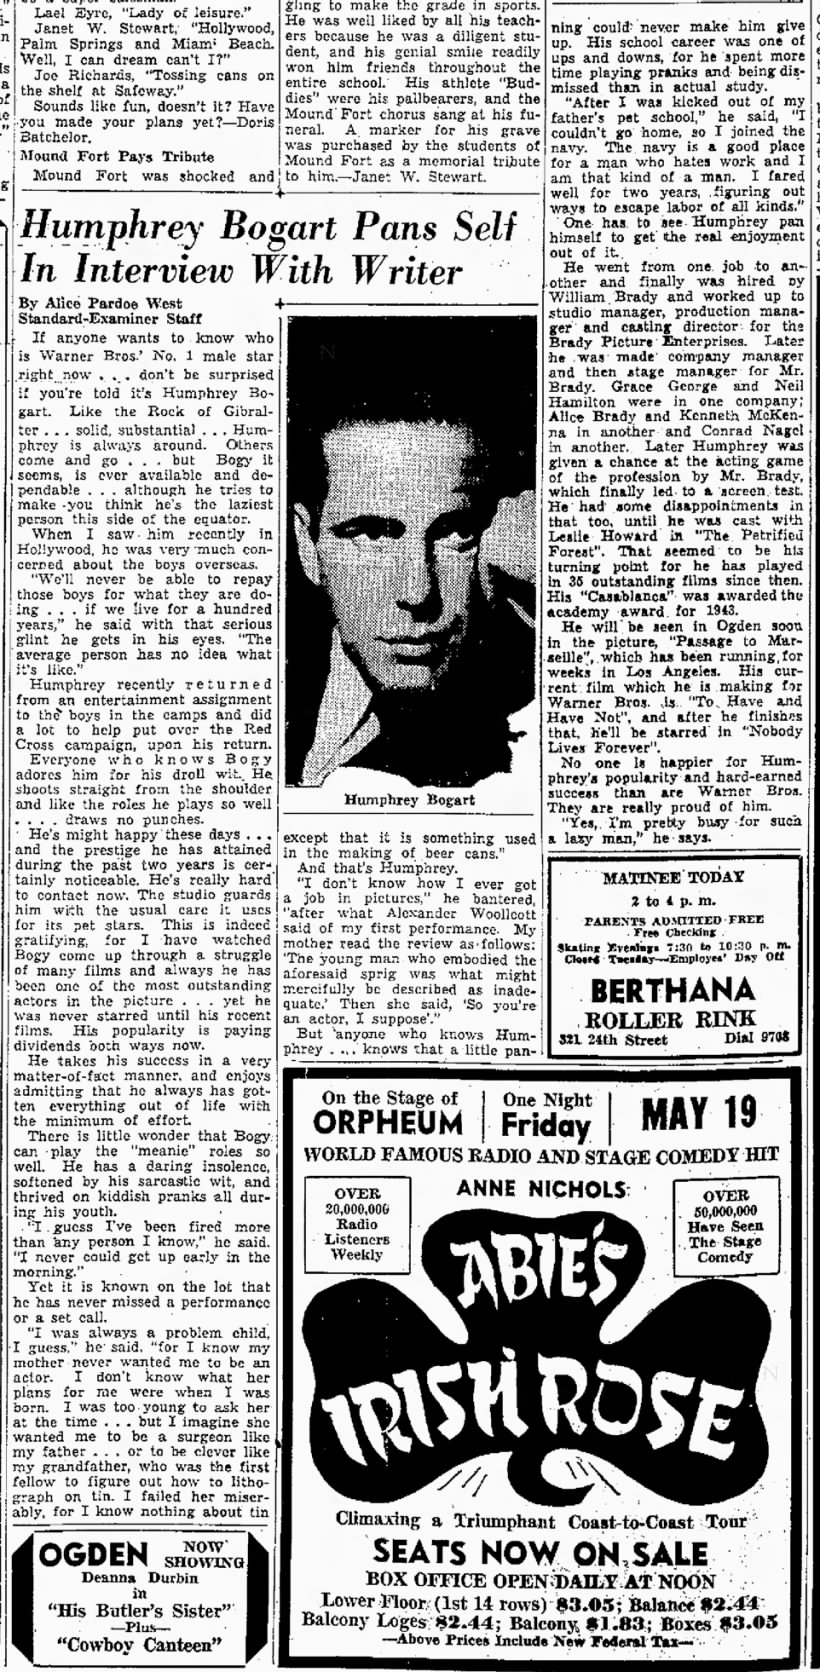 Humphrey Bogart is interviewed about his upbringing and his career